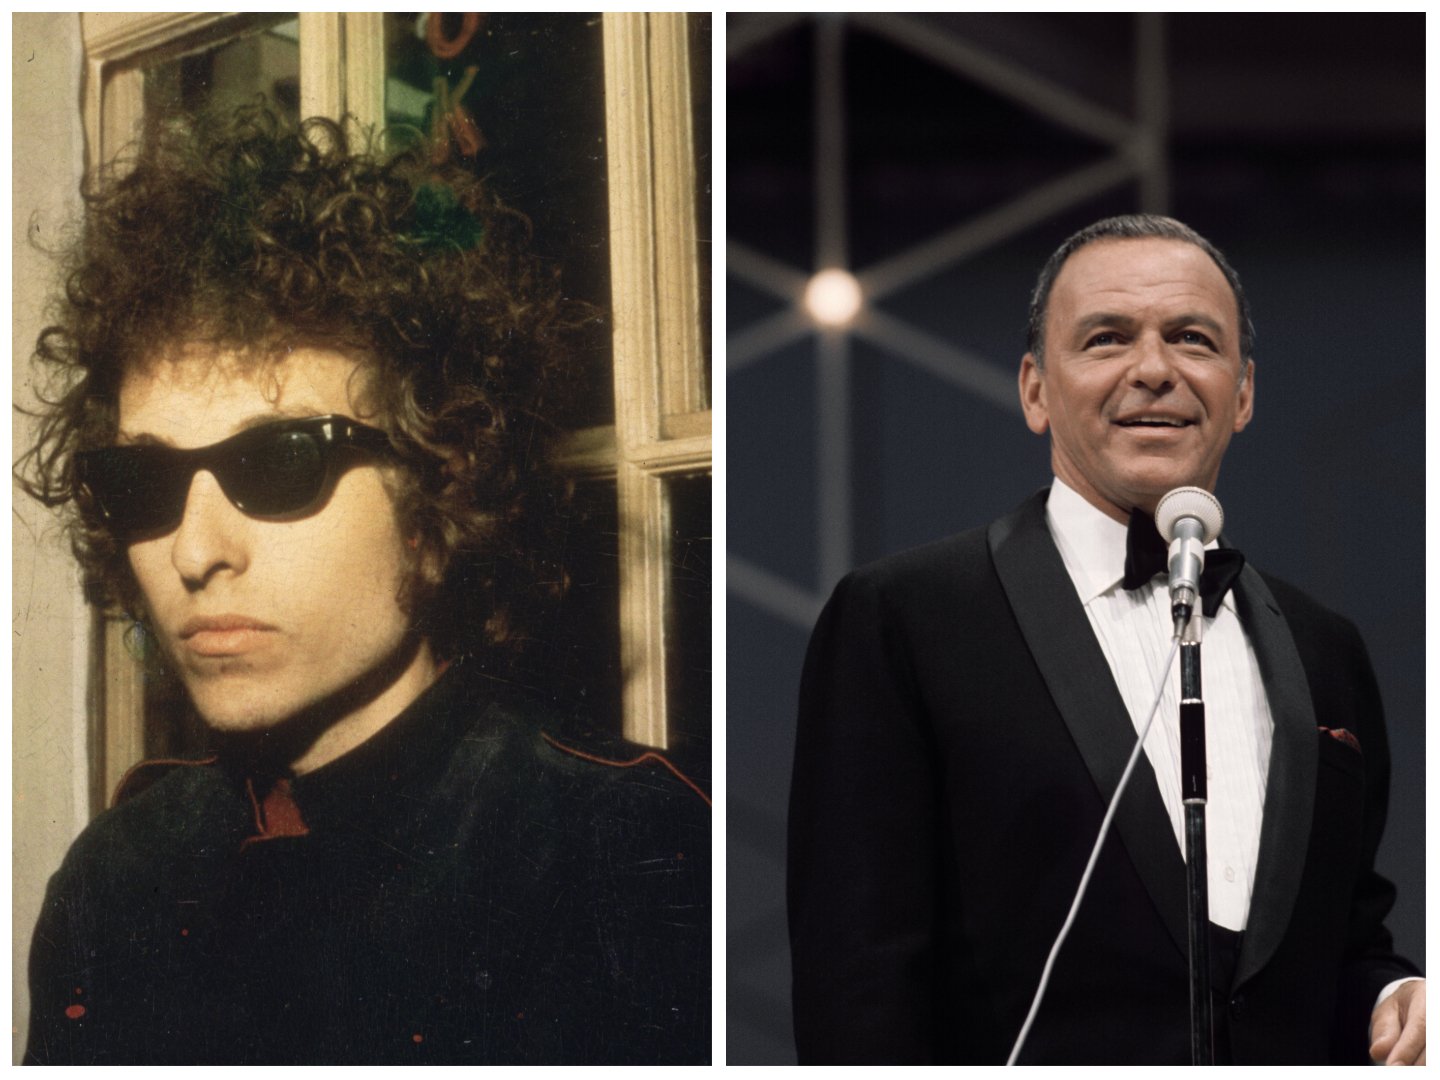 Bob Dylan wears sunglasses and stands near a window. Frank Sinatra wears a tuxedo and talks into a microphone